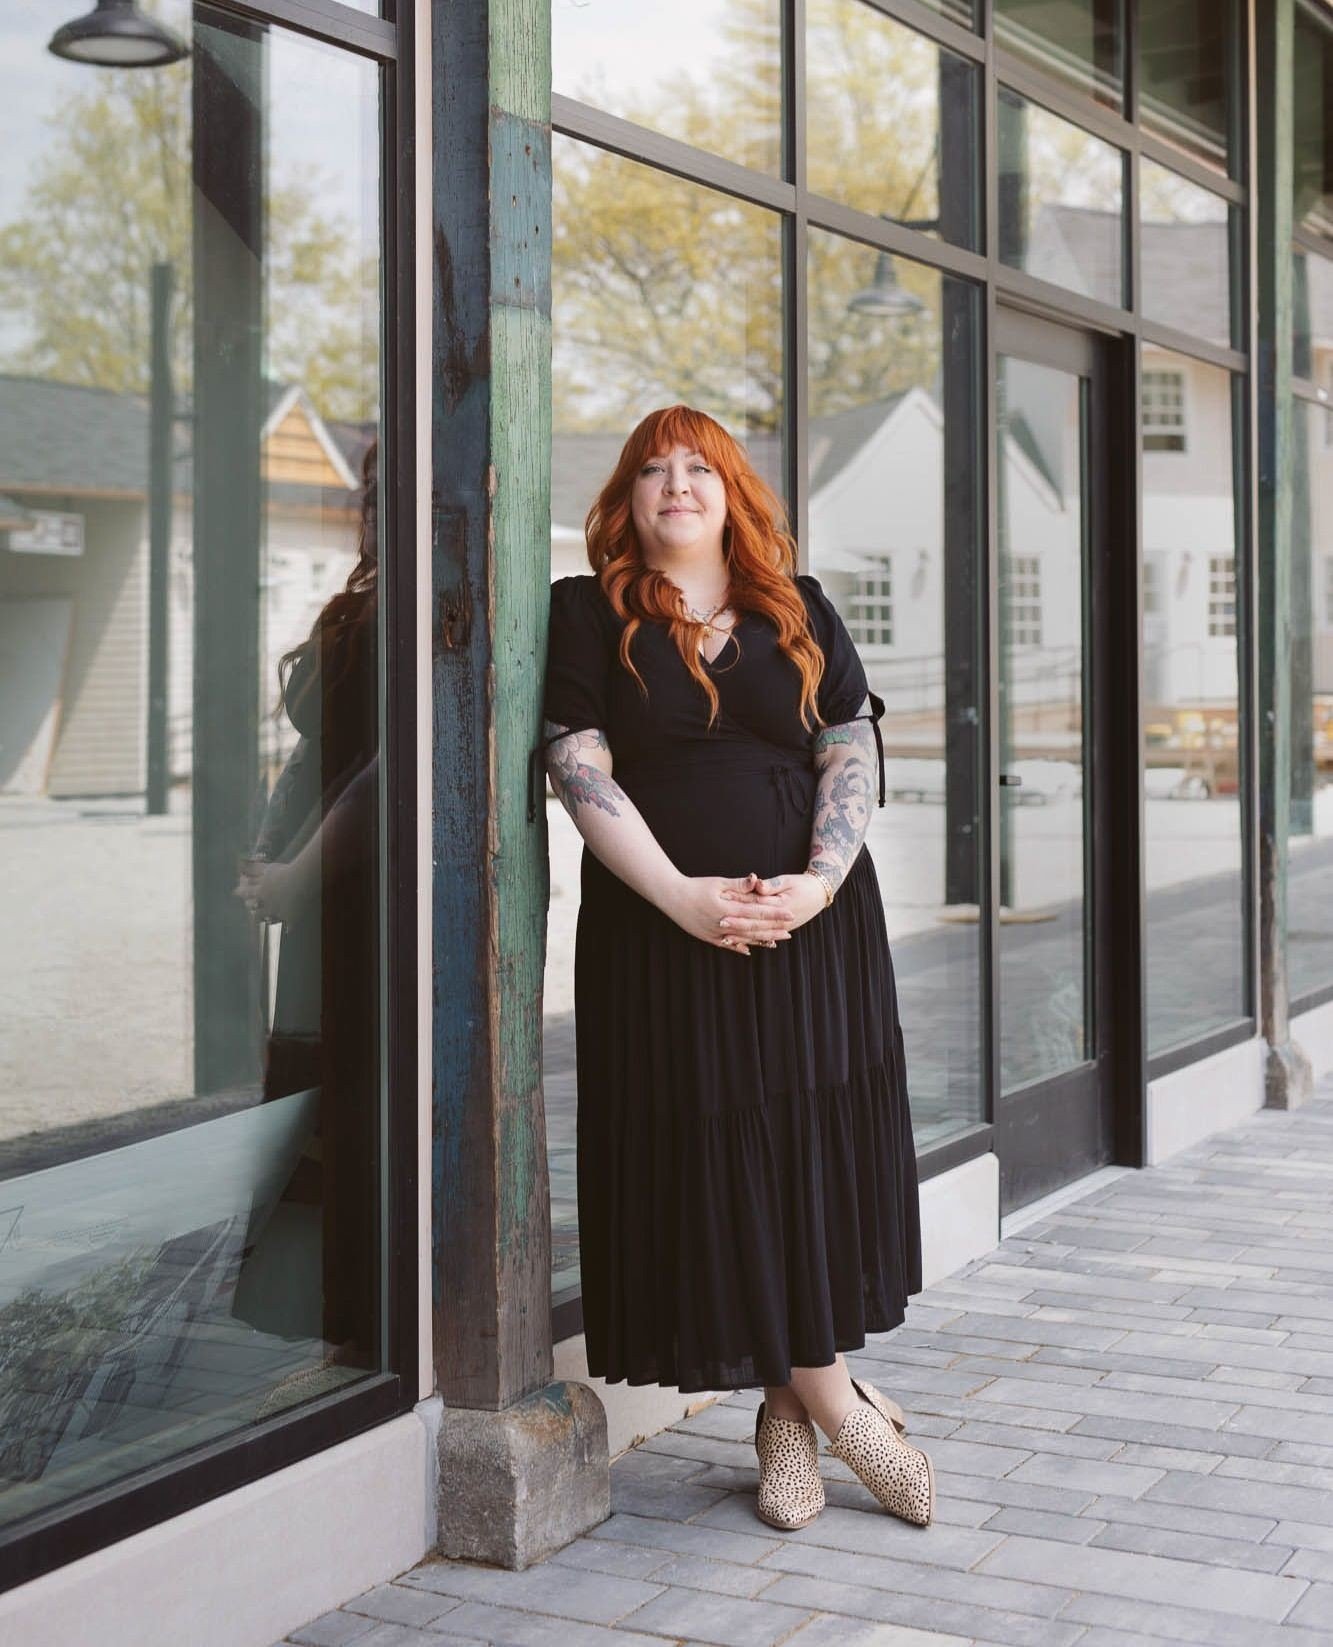 Melinda Brandt owns @bellwethersalon, a one-chair hair boutique at the @charlesriverspeedway in Allston. That hub of shops, restaurants, and other small businesses is a welcomed change to Brandt. As she explained to @edibleboston, it&rsquo;s exciting